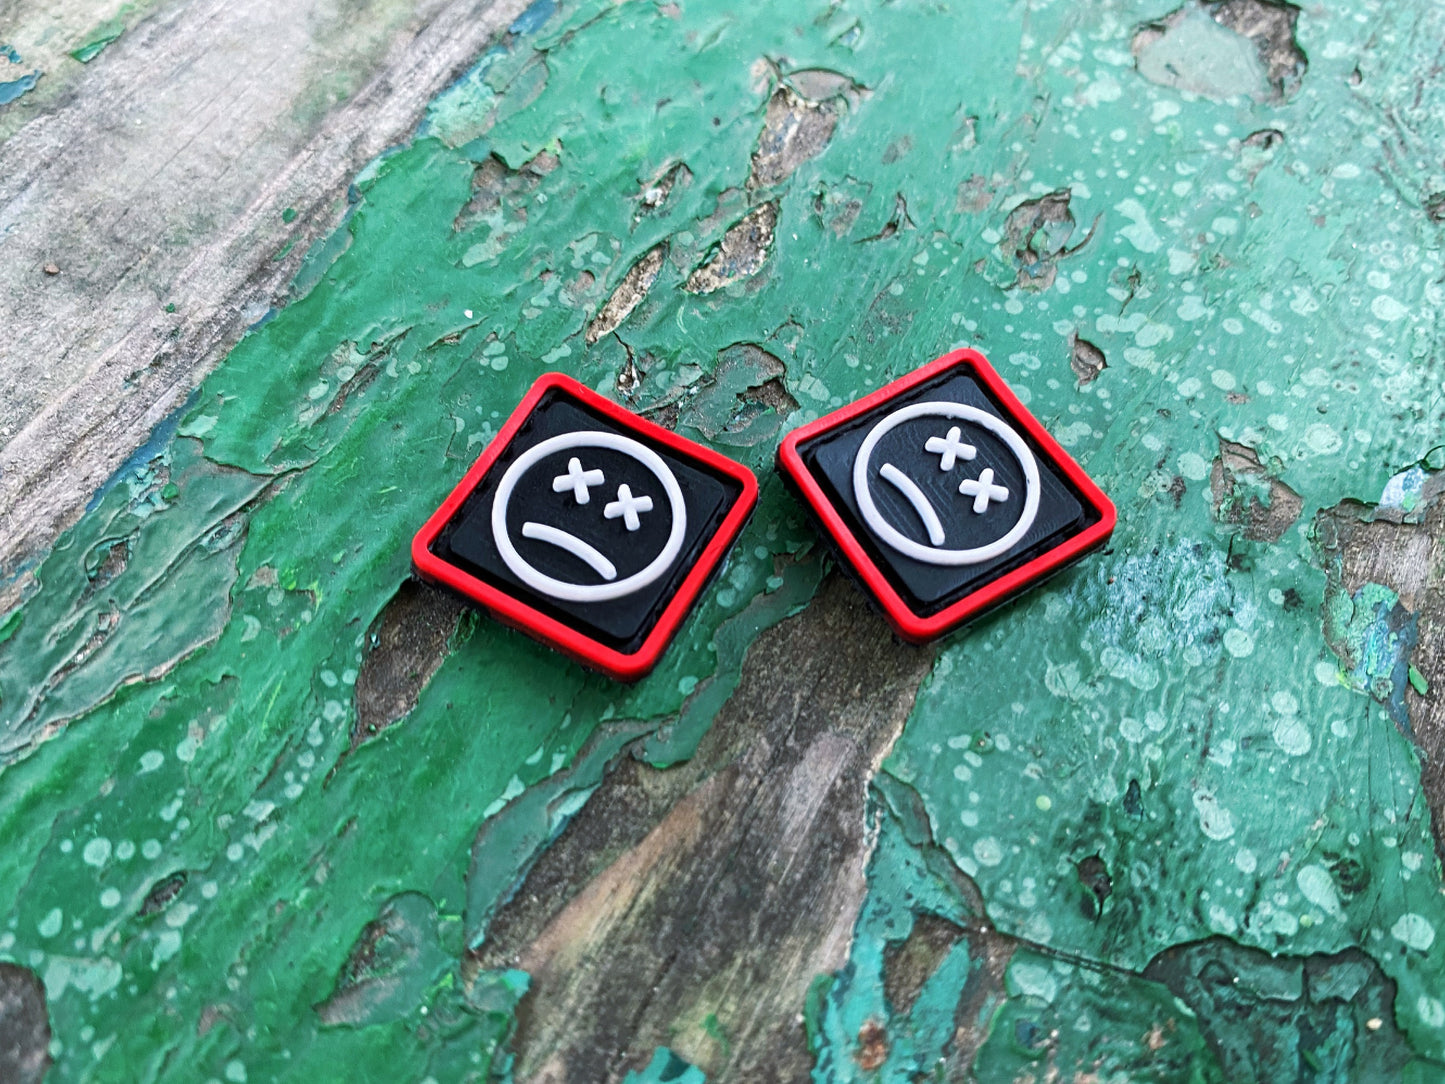 EDC Velcro Patch Sad Face Red, Black, and White 2 pcs.